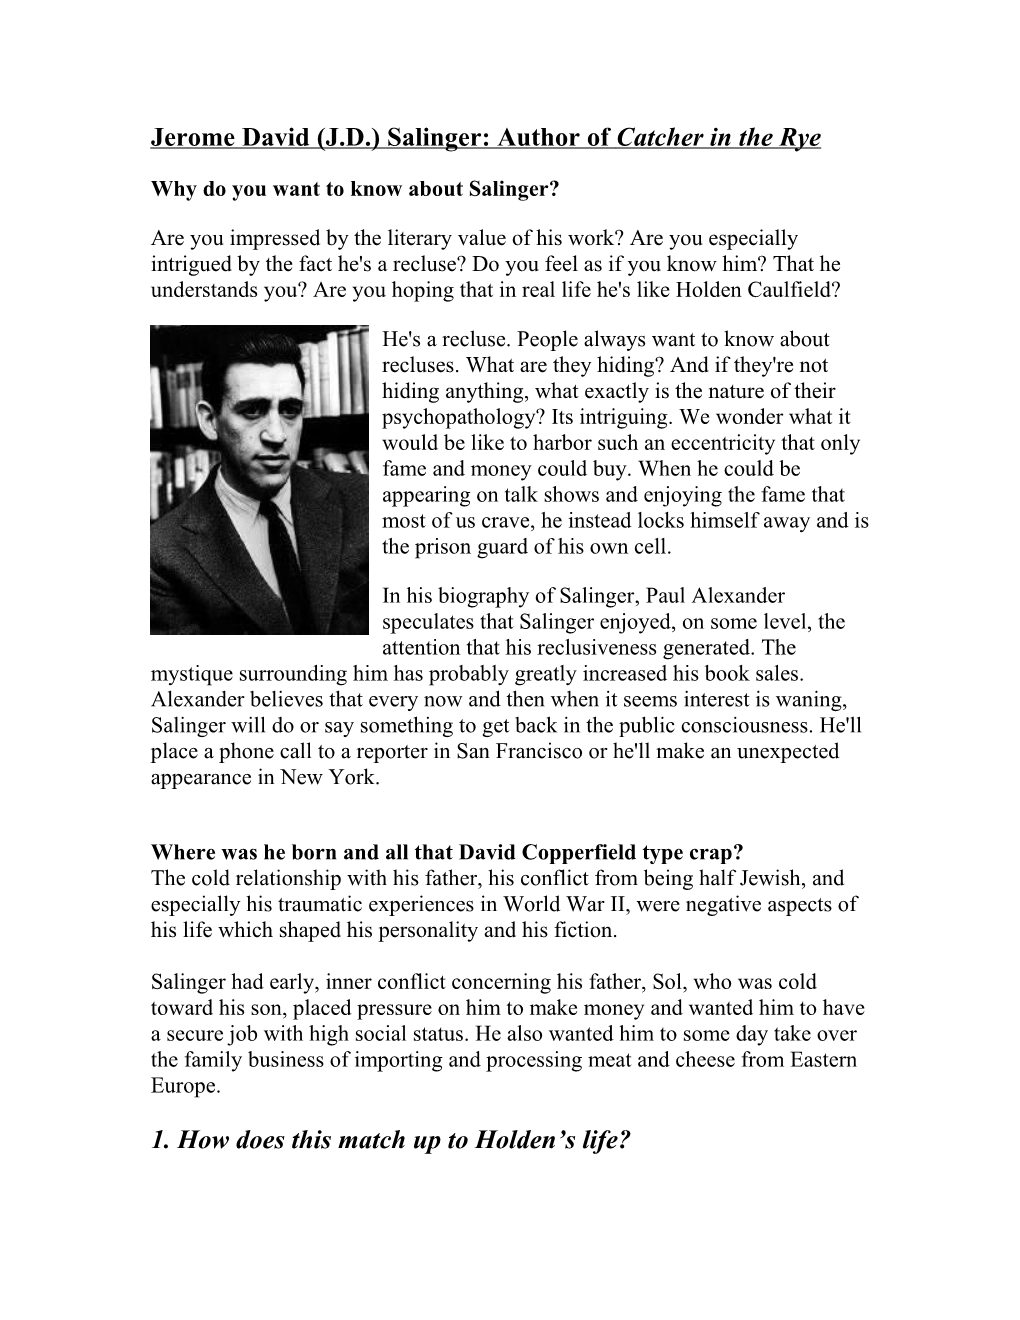 Jerome David (J.D.) Salinger: Author of Catcher in the Rye